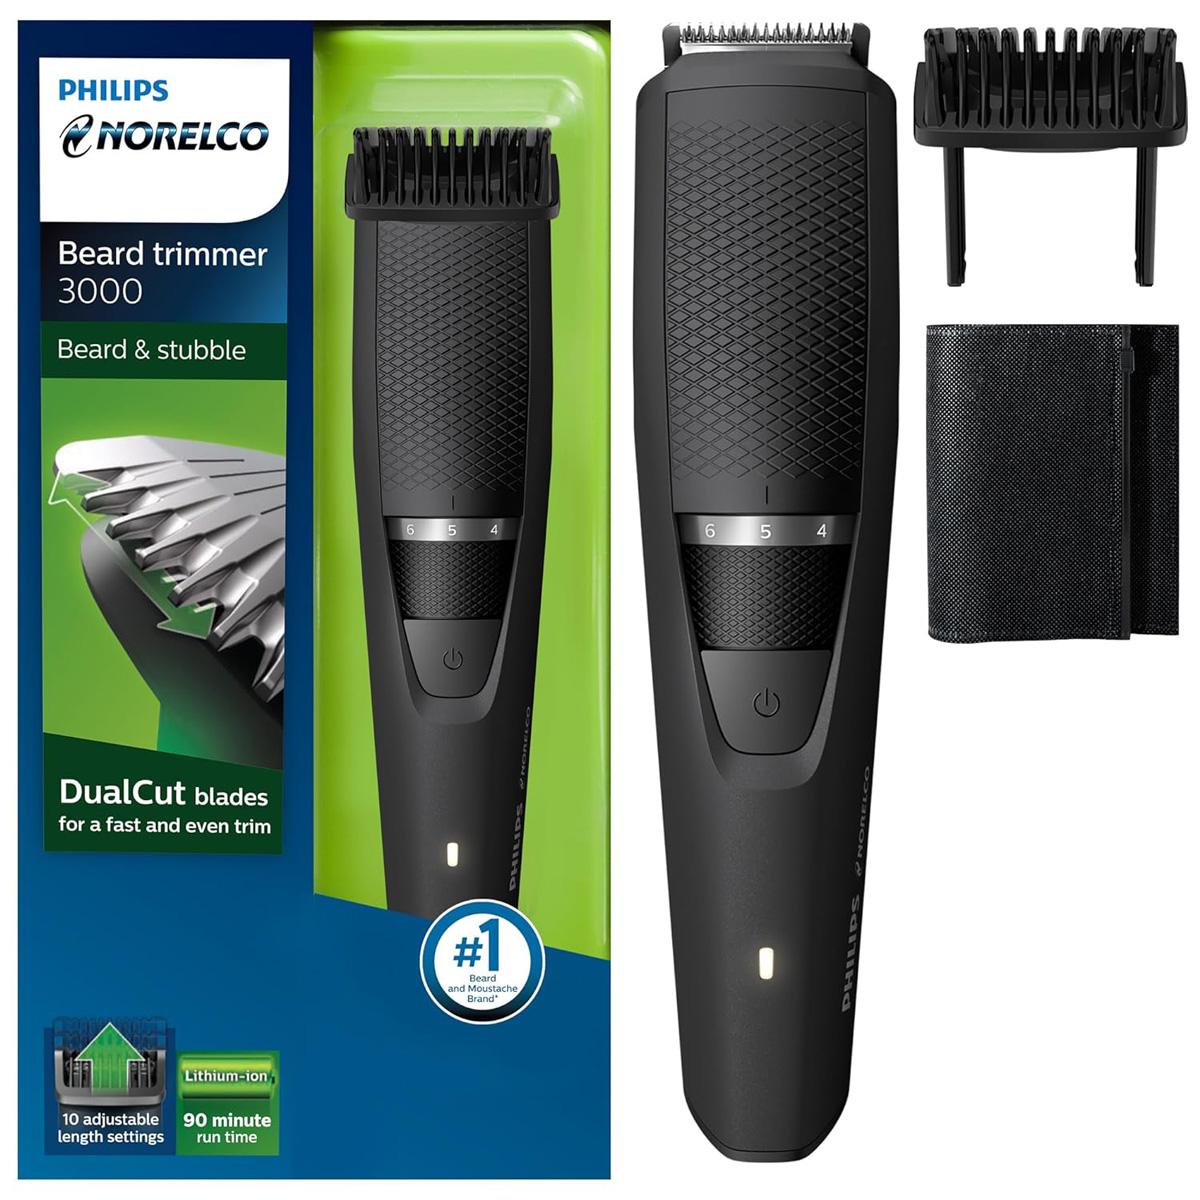 Philips Norelco Series 3000 Rechargeable Beard Trimmer Hair Clipper for $17.46